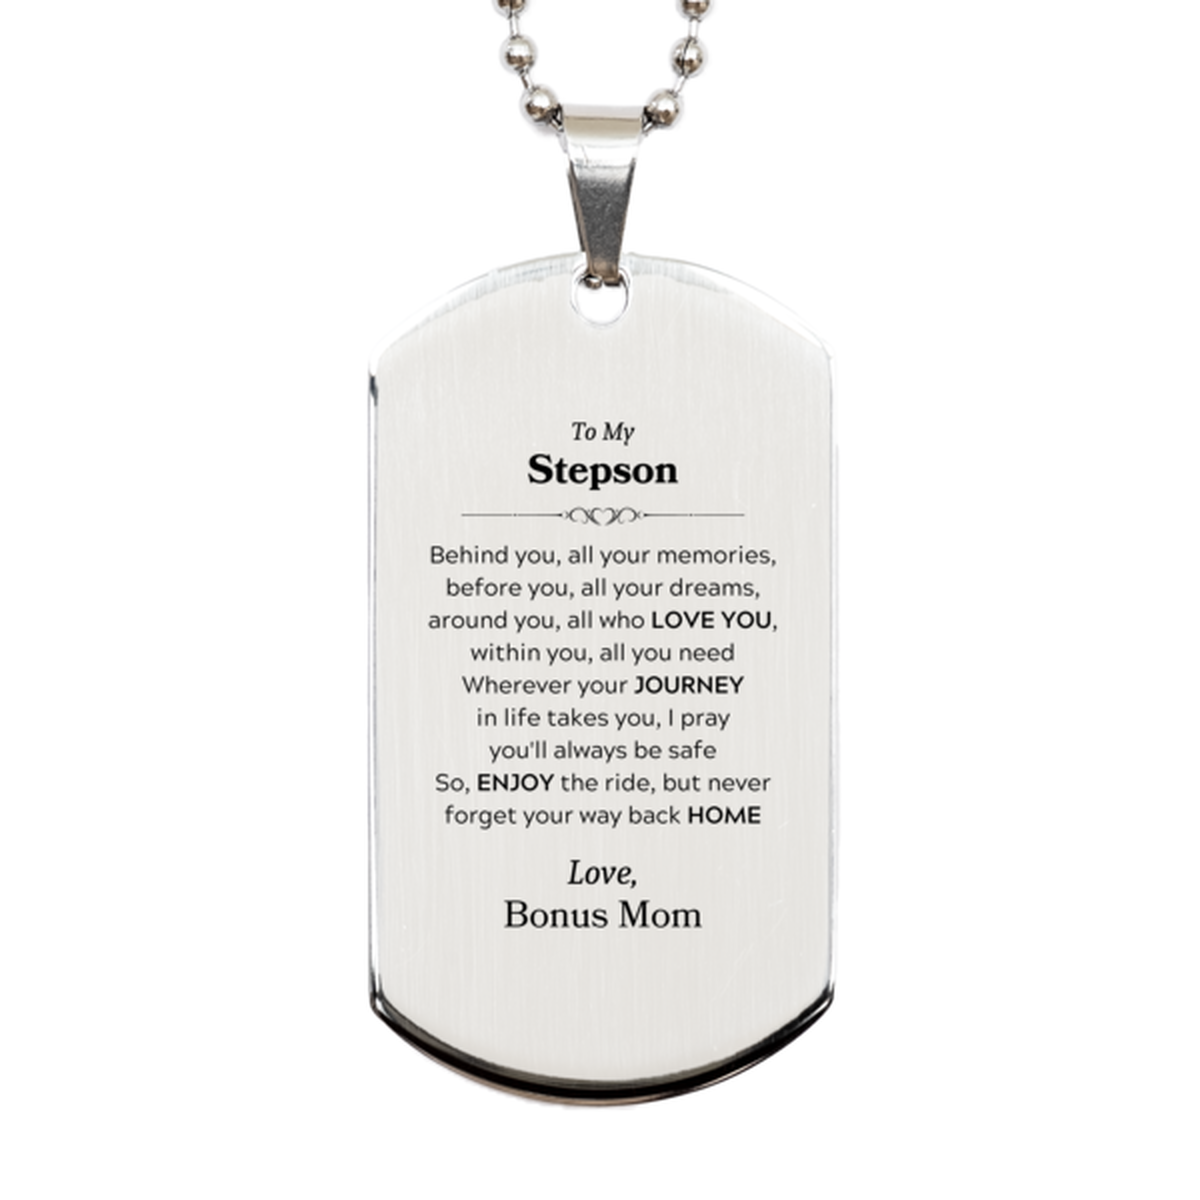 To My Stepson Graduation Gifts from Bonus Mom, Stepson Silver Dog Tag Christmas Birthday Gifts for Stepson Behind you, all your memories, before you, all your dreams. Love, Bonus Mom